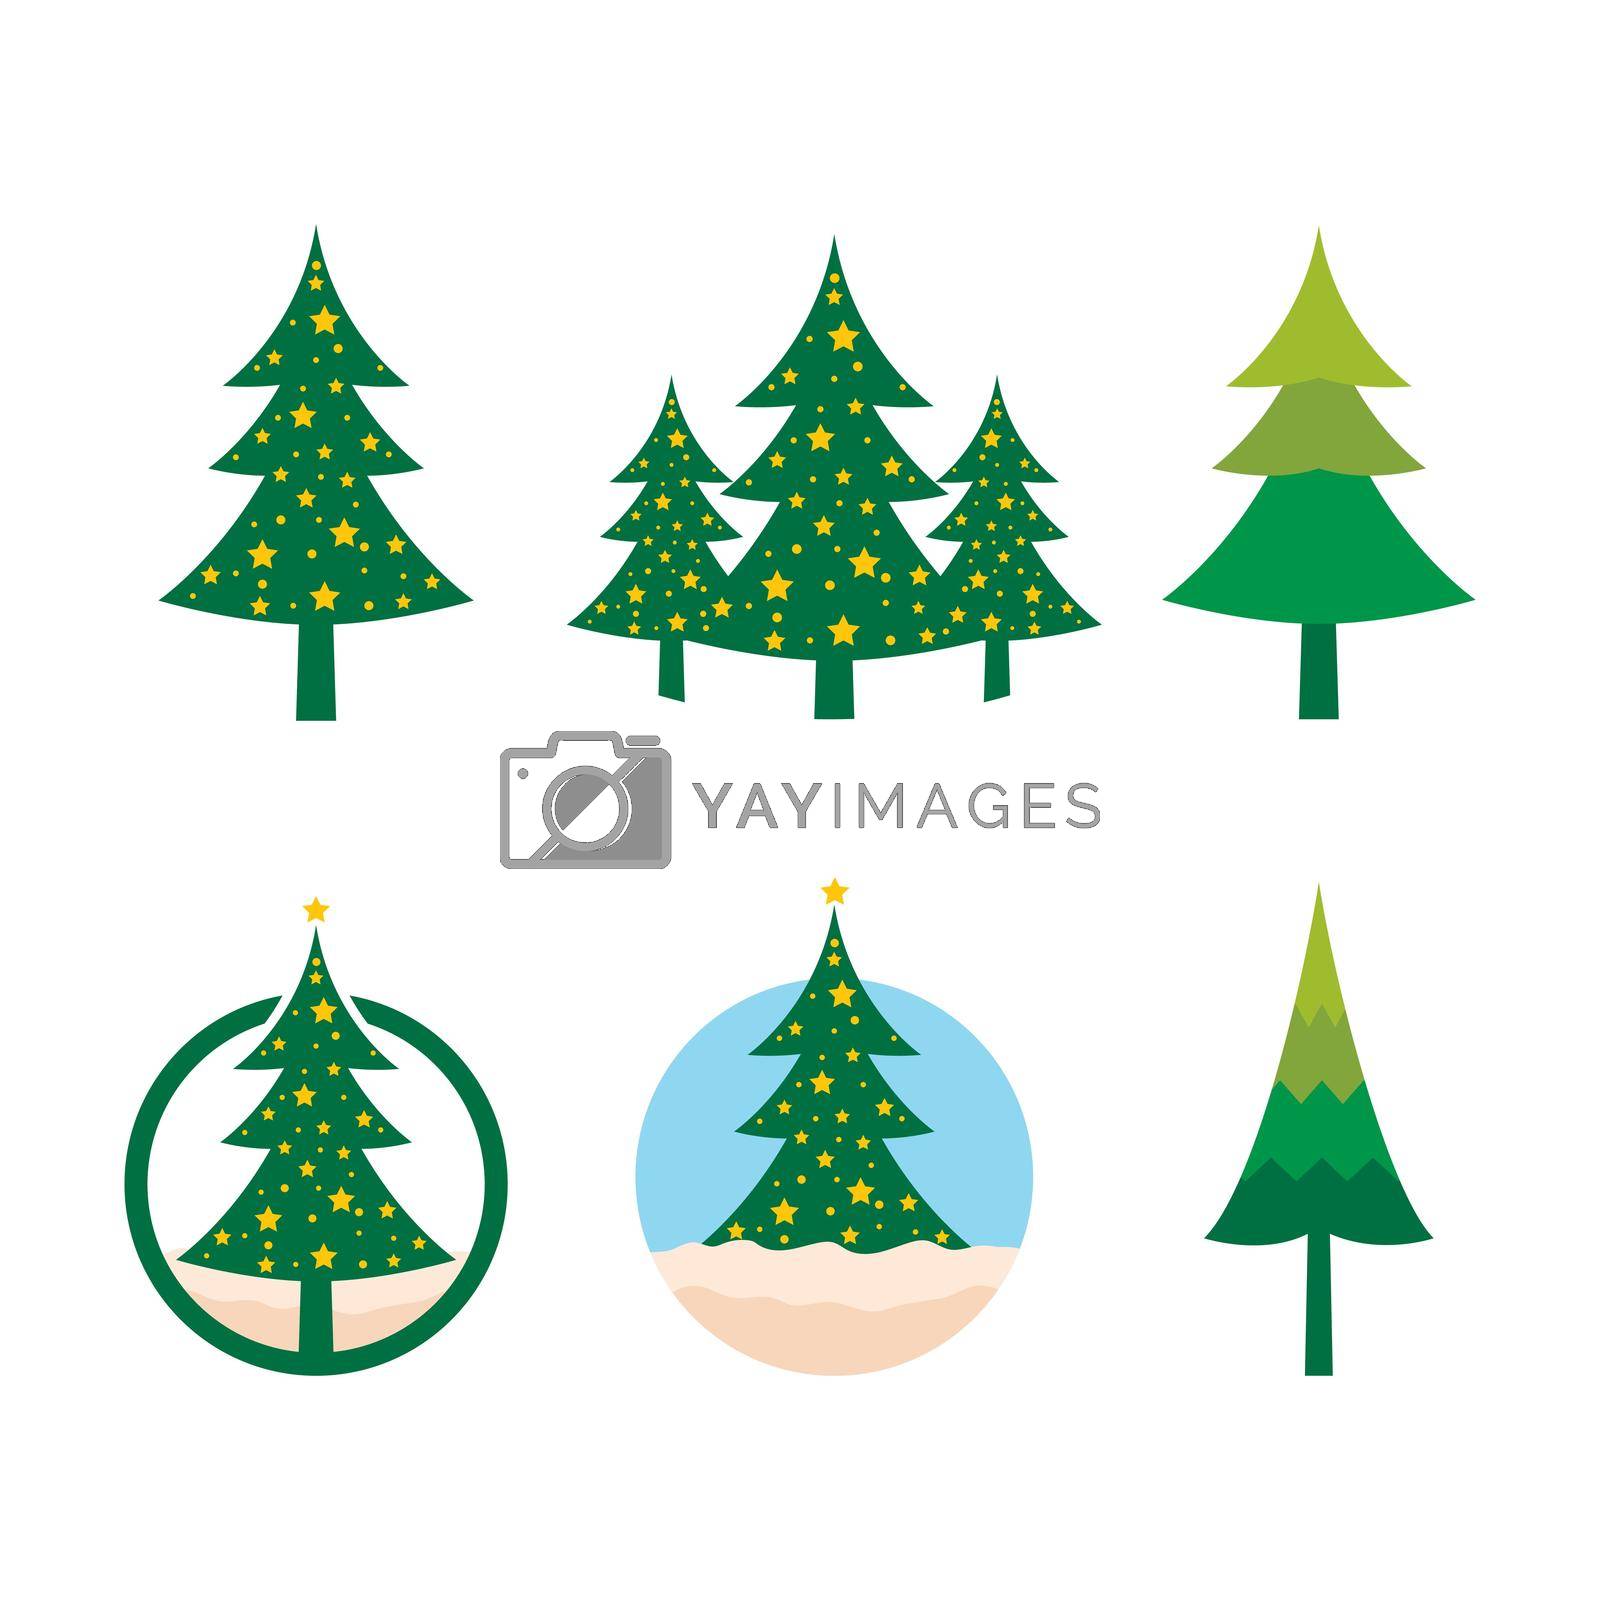 Royalty free image of Pine tree illustration by awk